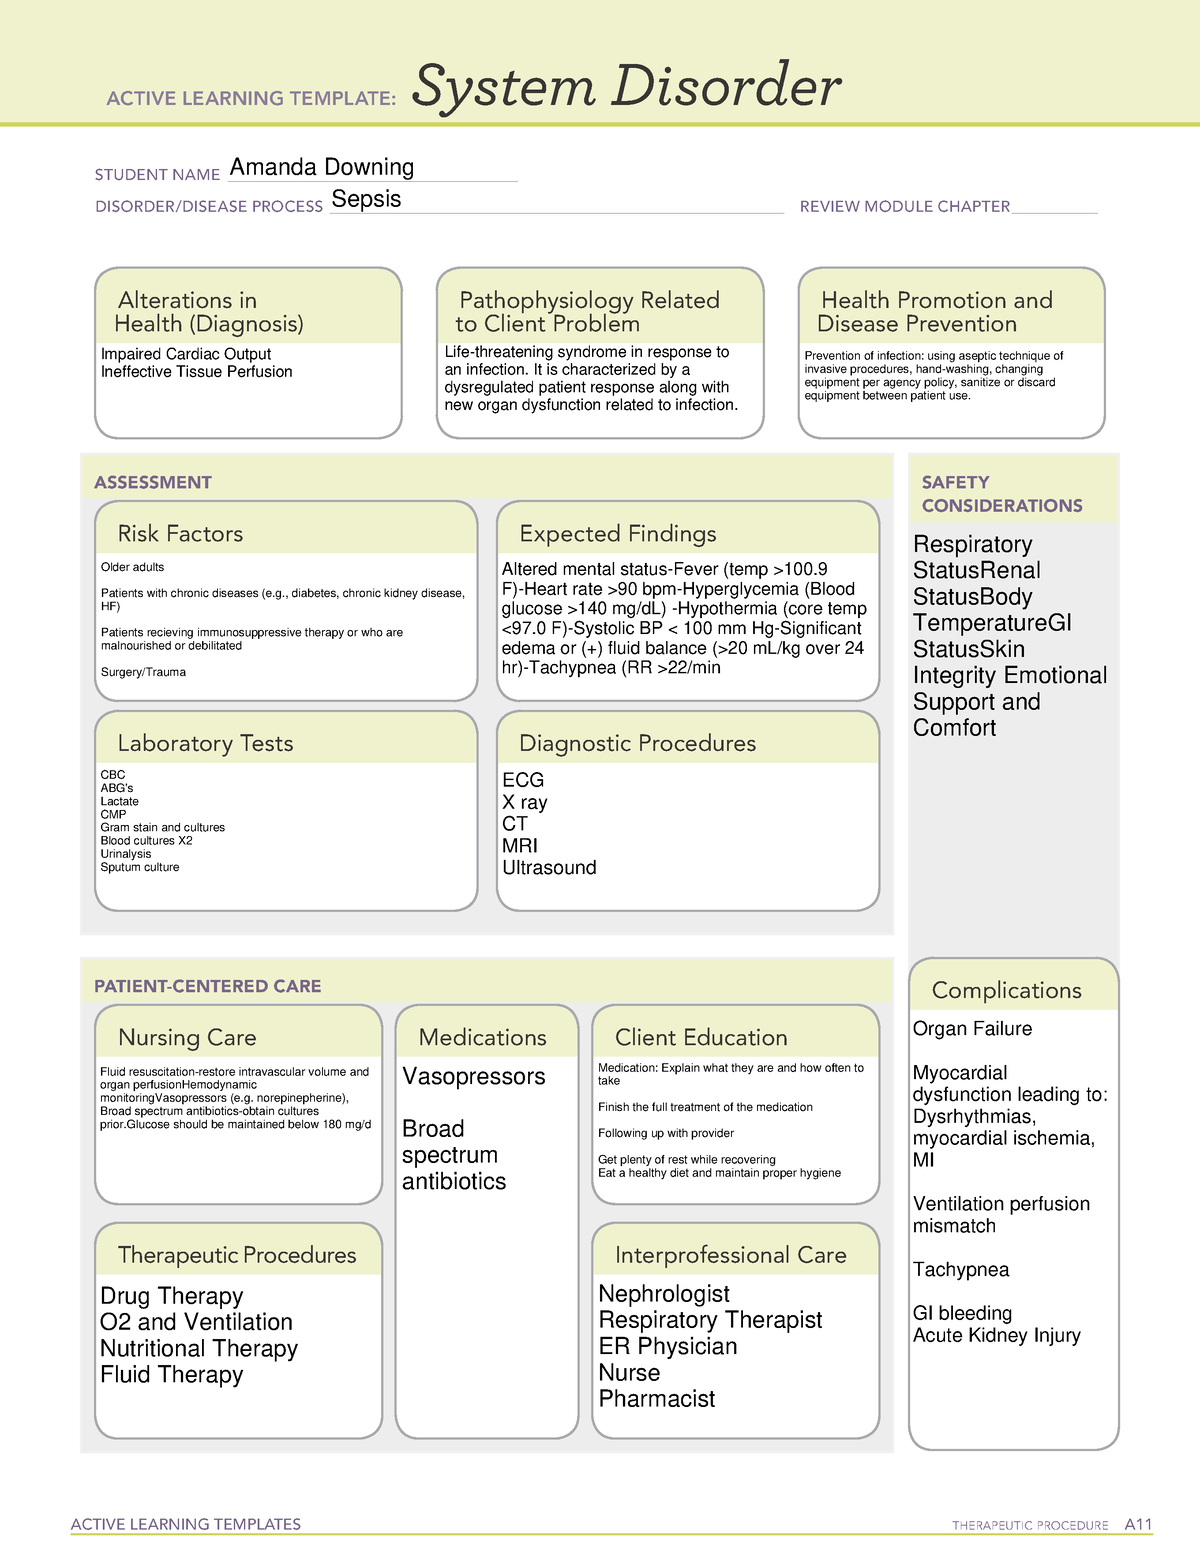 ati-system-disorder-template-sepsis-active-learning-templates